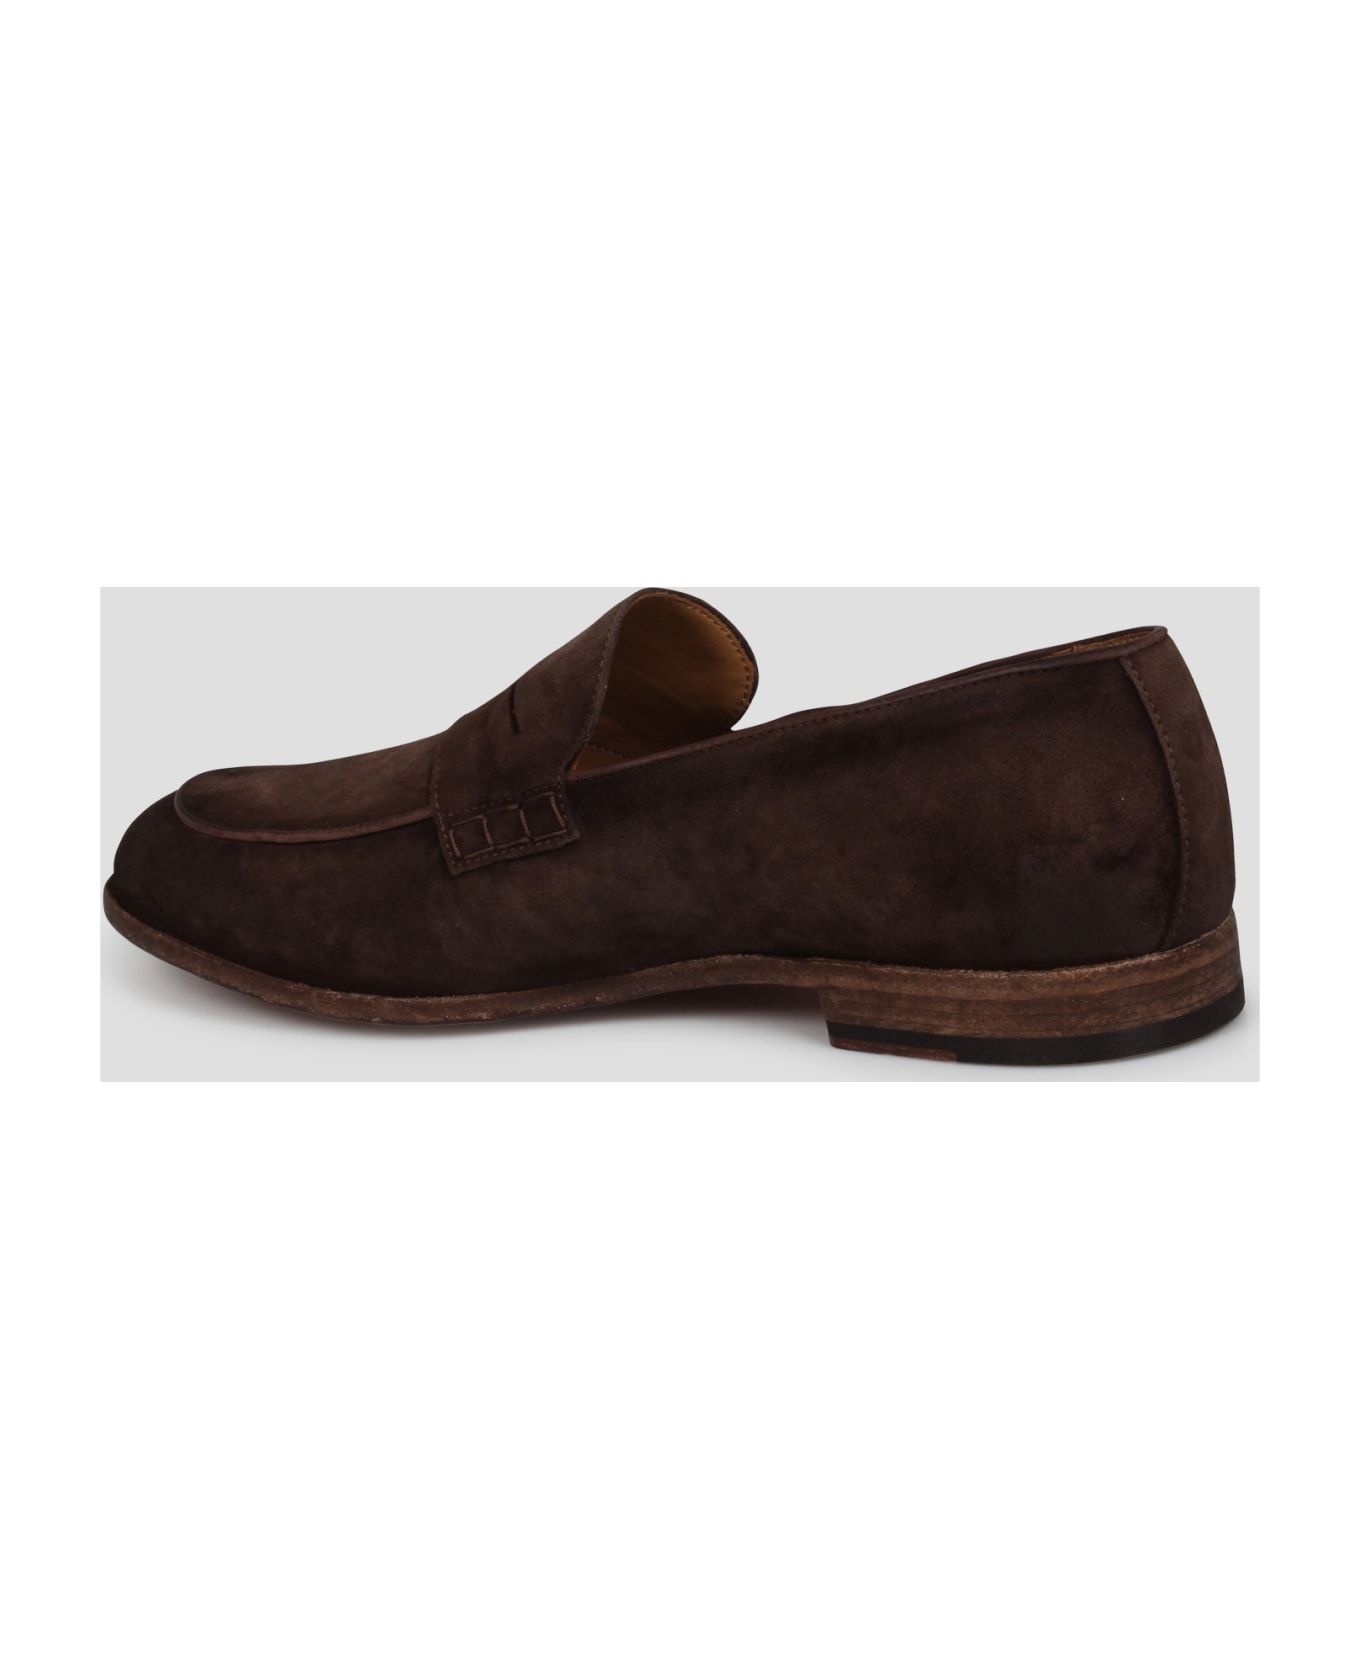 Corvari Brushed Suede Loafers - Brown